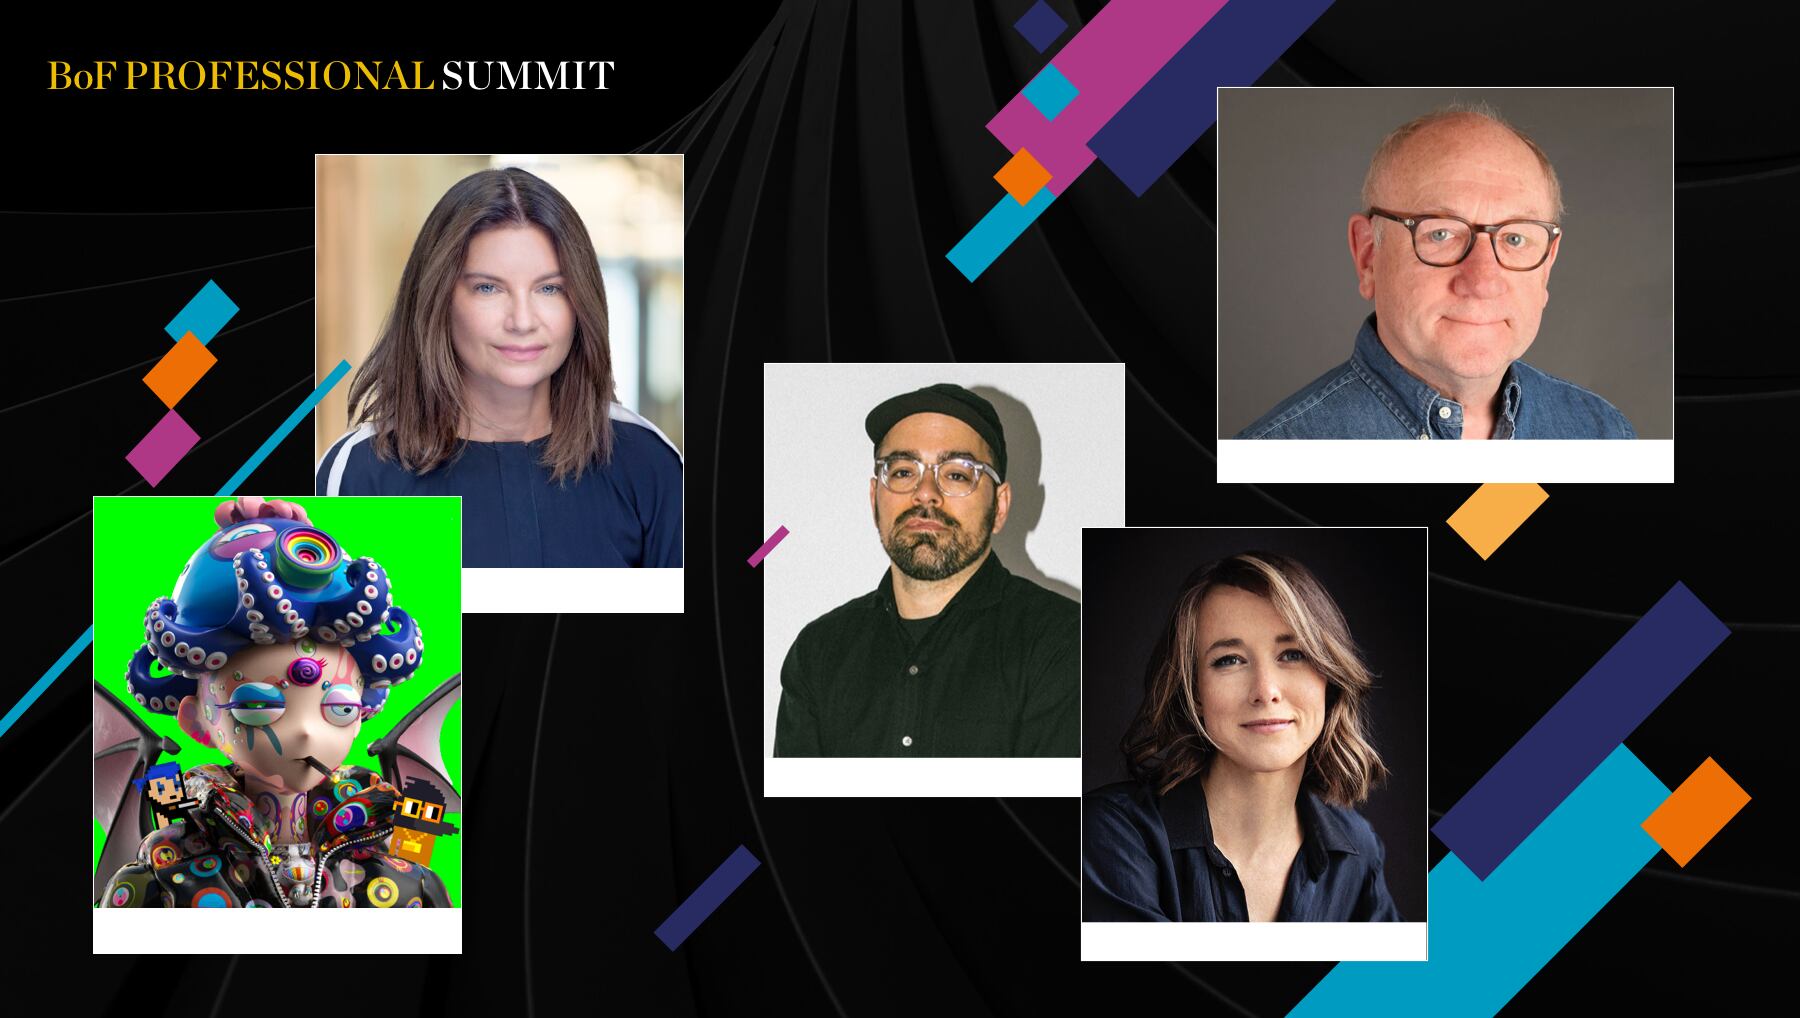 BoF Professional Summit: New Frontiers in Fashion and Technology